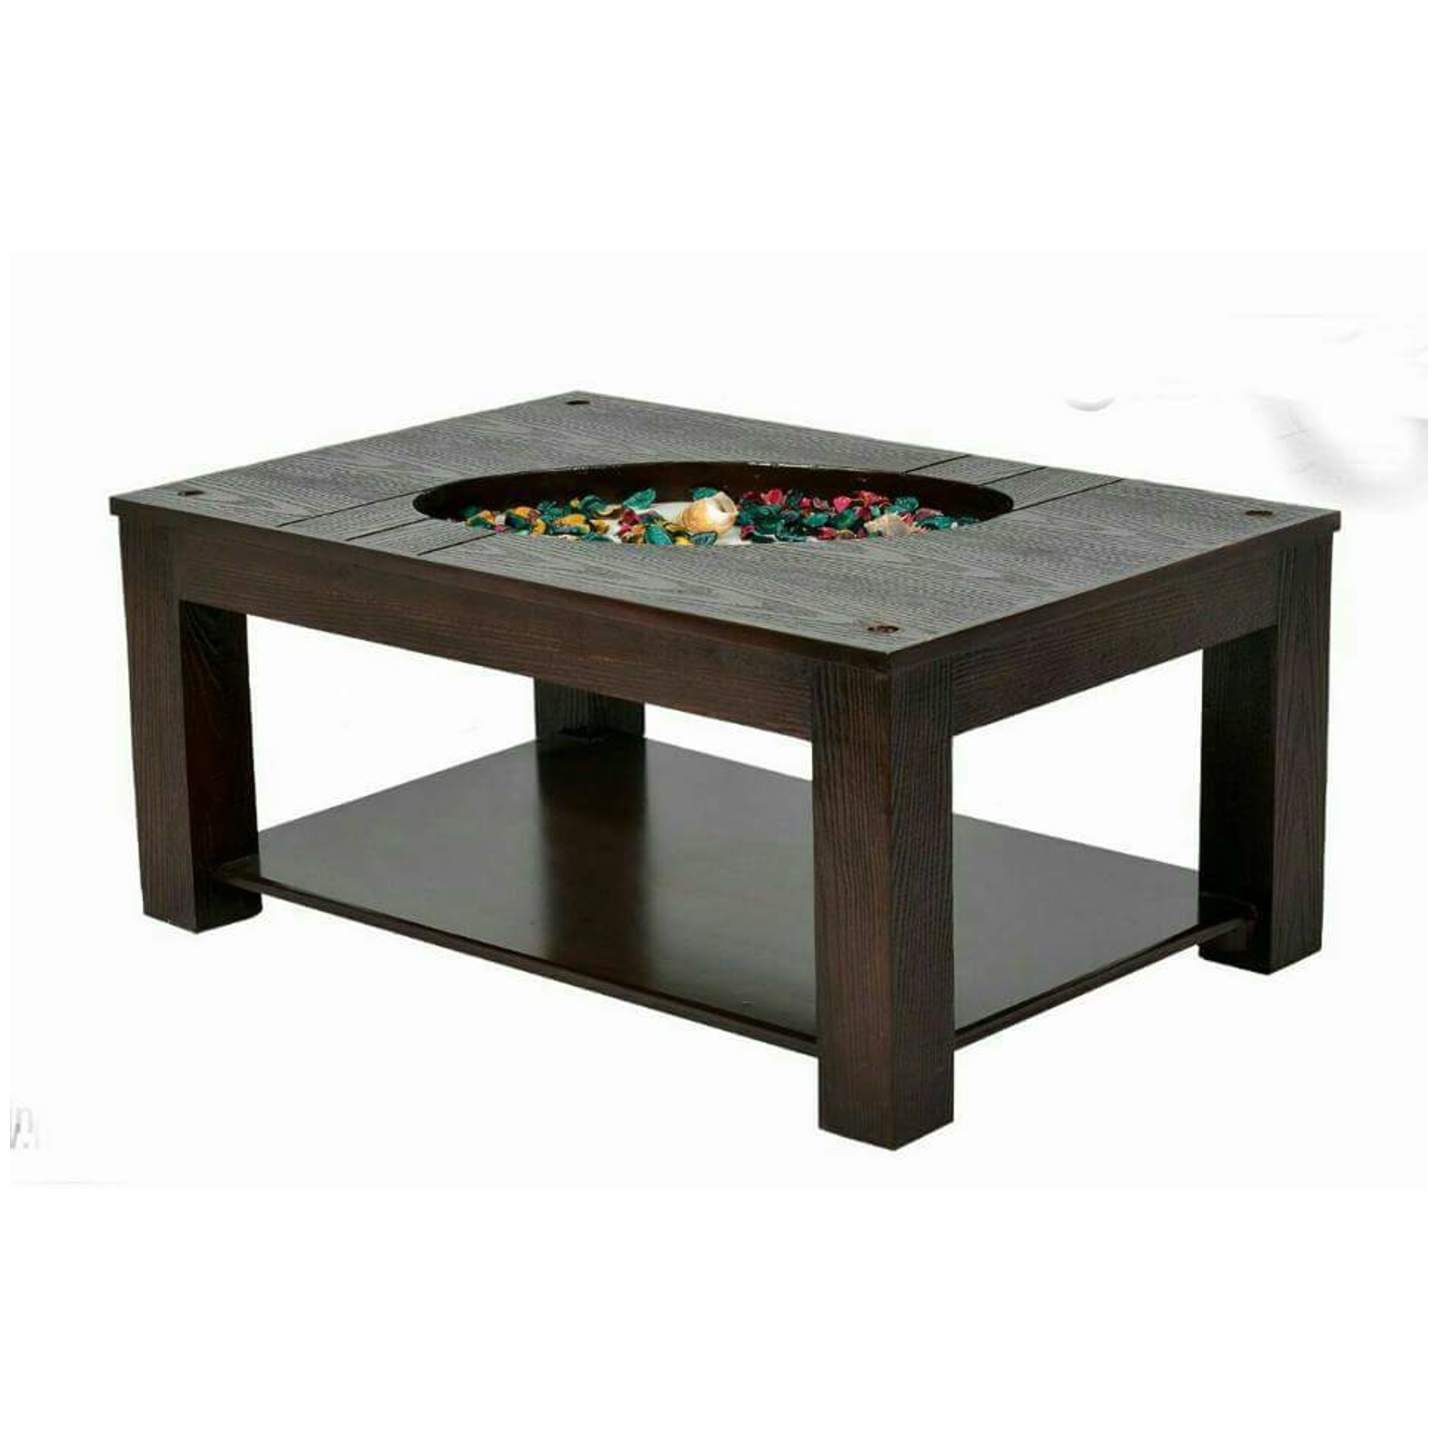 DW Center Table C-09 1 Box In Brown Colour